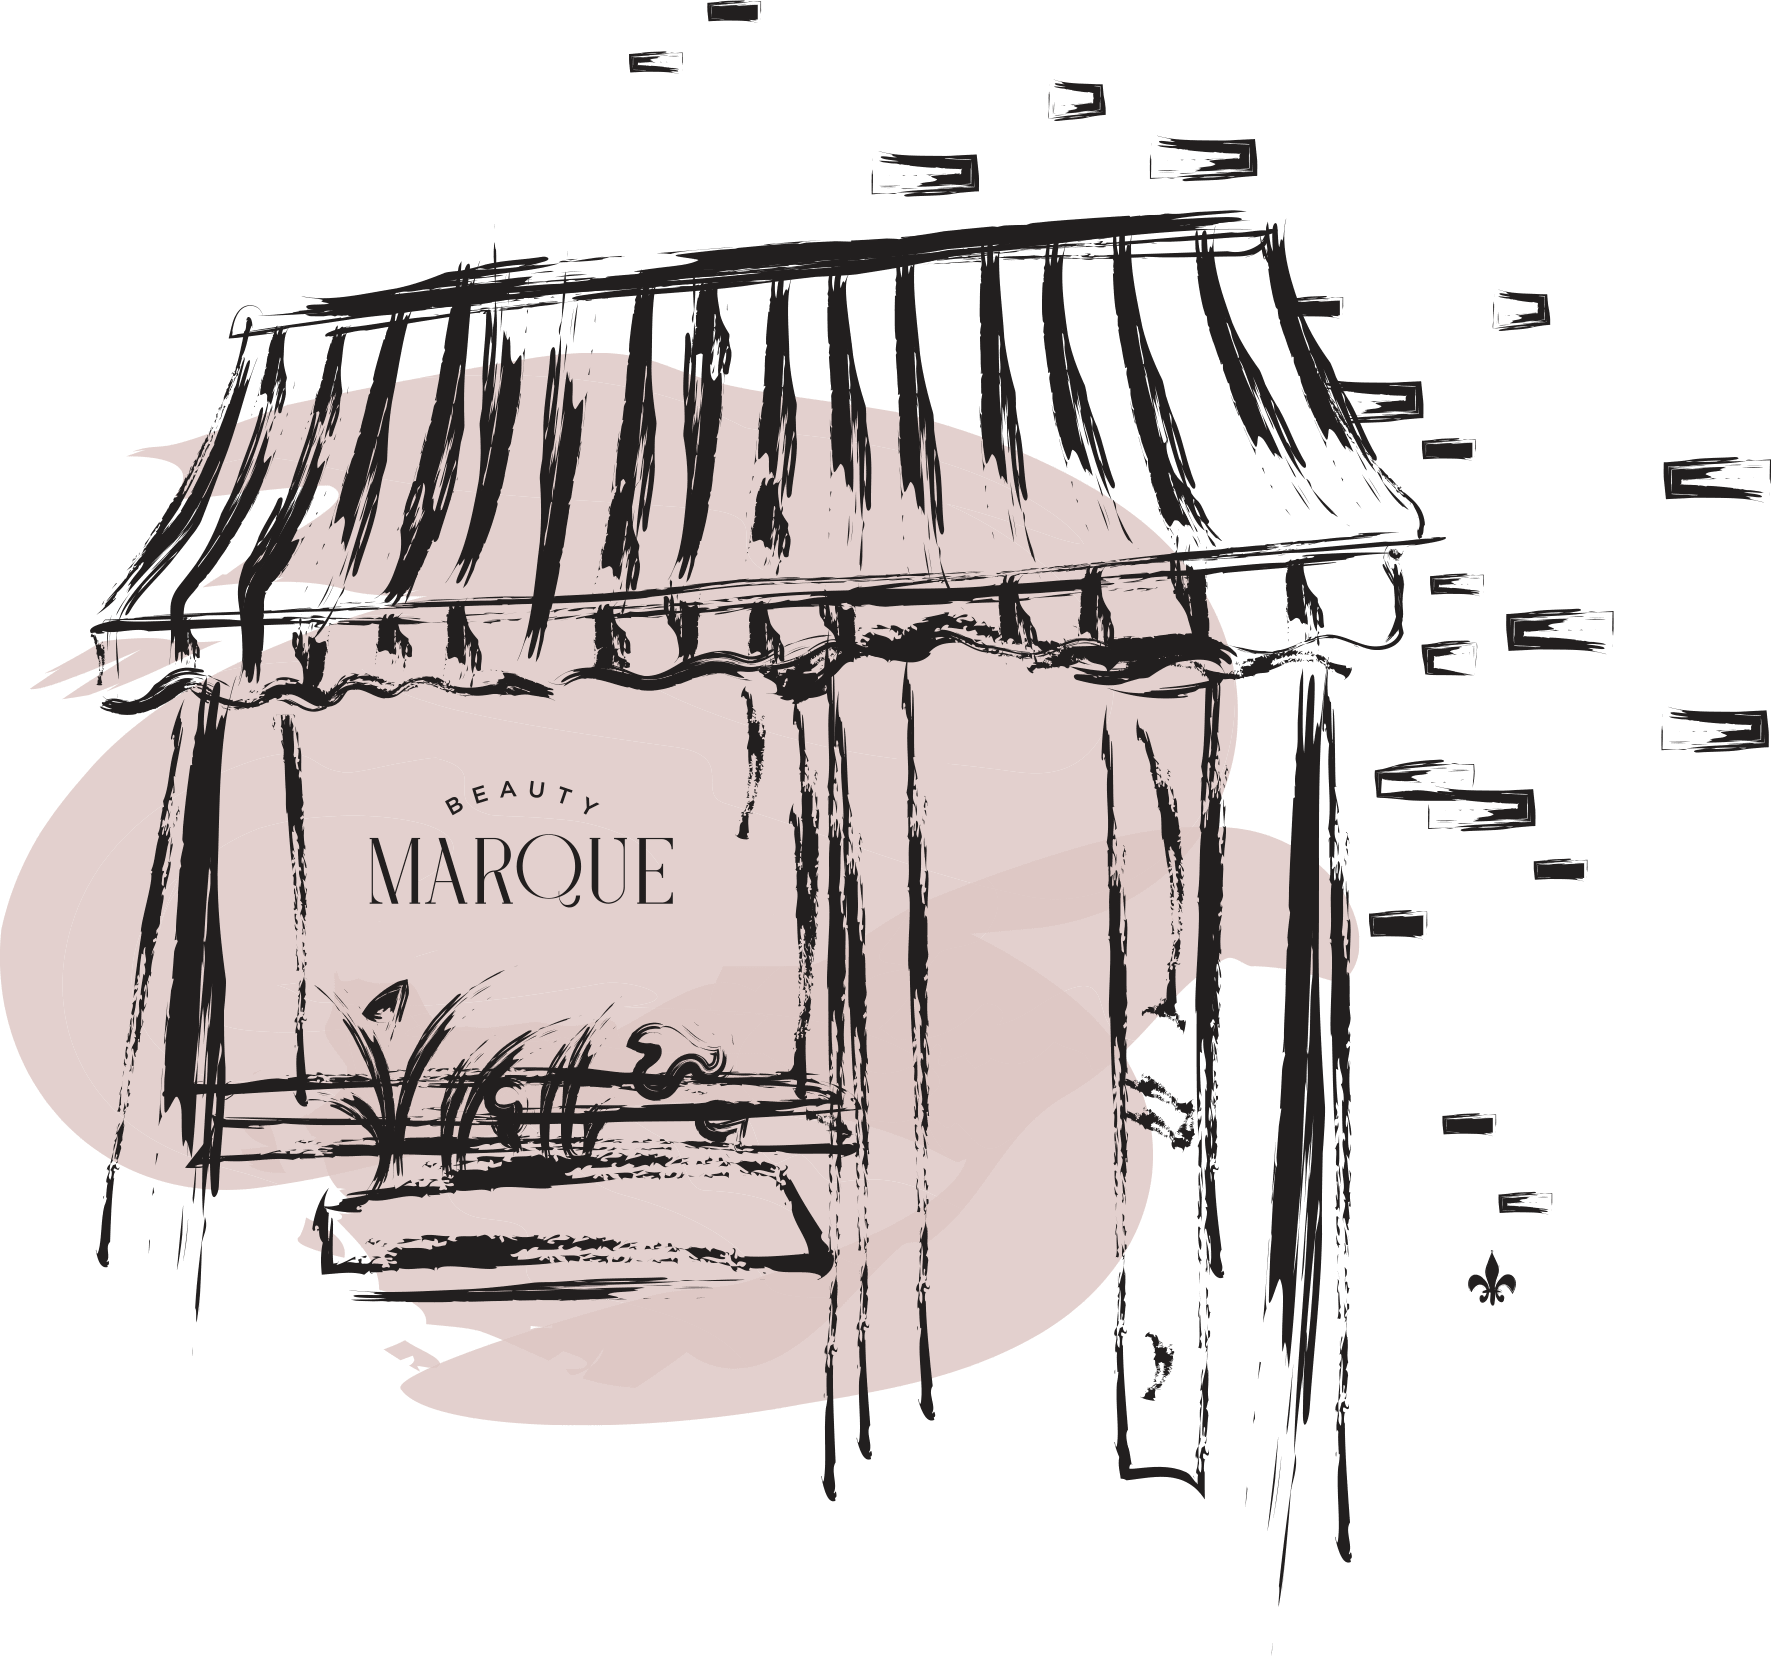 Beauty Marque is a Beauty Salon and an online store for beauty products